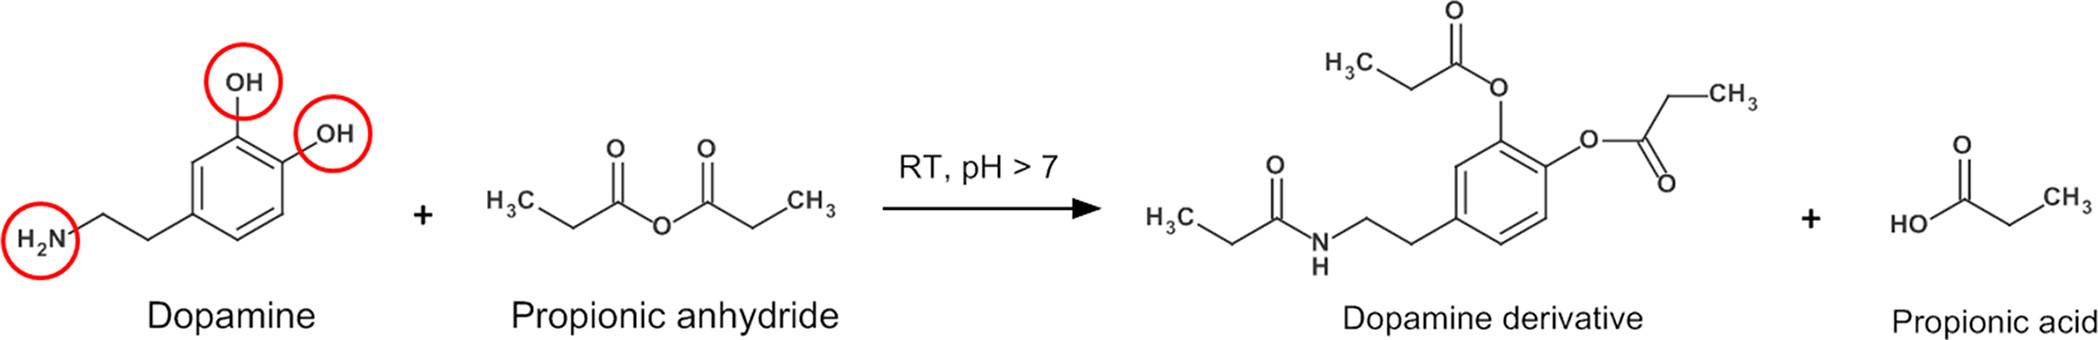 Derivatization reaction of dopamine with propionic anhydride. Formed derivative product is shown on the right side.